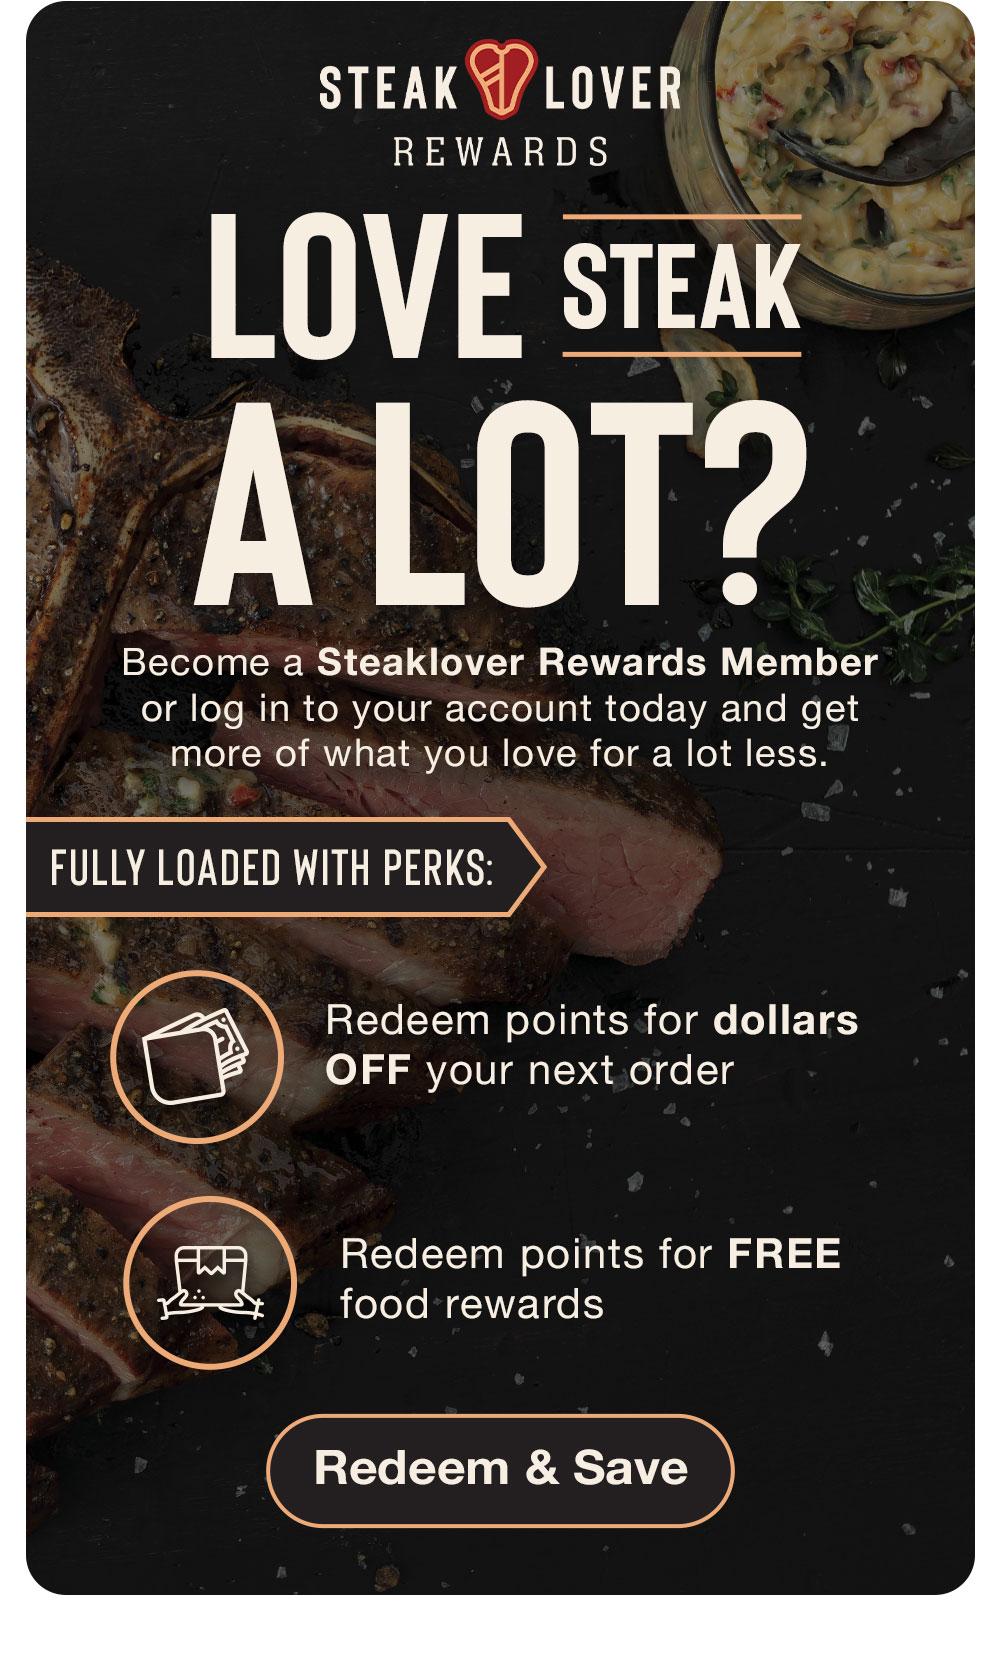 STEAK LOVER REWARDS | LOVE STEAK A LOT? Become a Steaklover Rewards Member or log in to your account today and get more of what you love for a lot less. | FULLY LOADED WITH PERKS: Redeem points for dollars OFF your next order - Redeem points for FREE food rewards || Redeem & Save